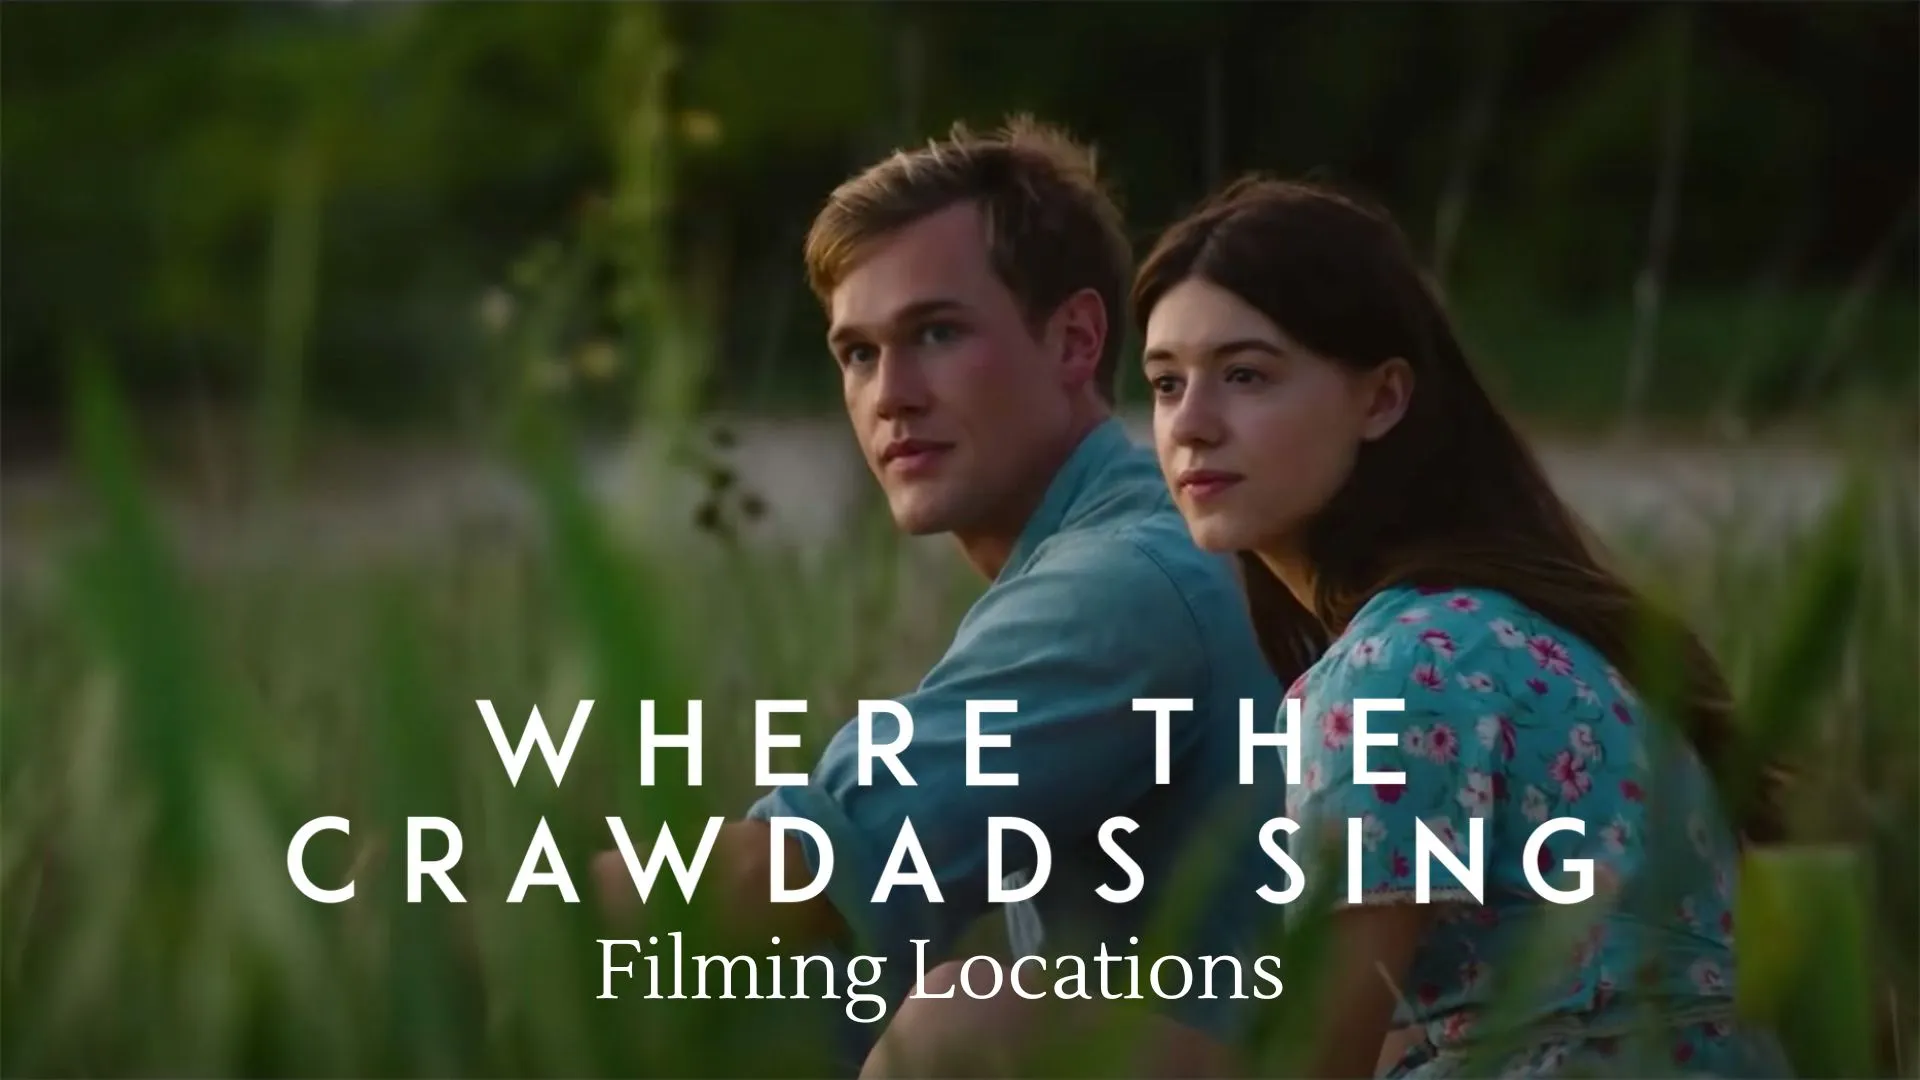 Where The Crawdads Sing Filming Locations